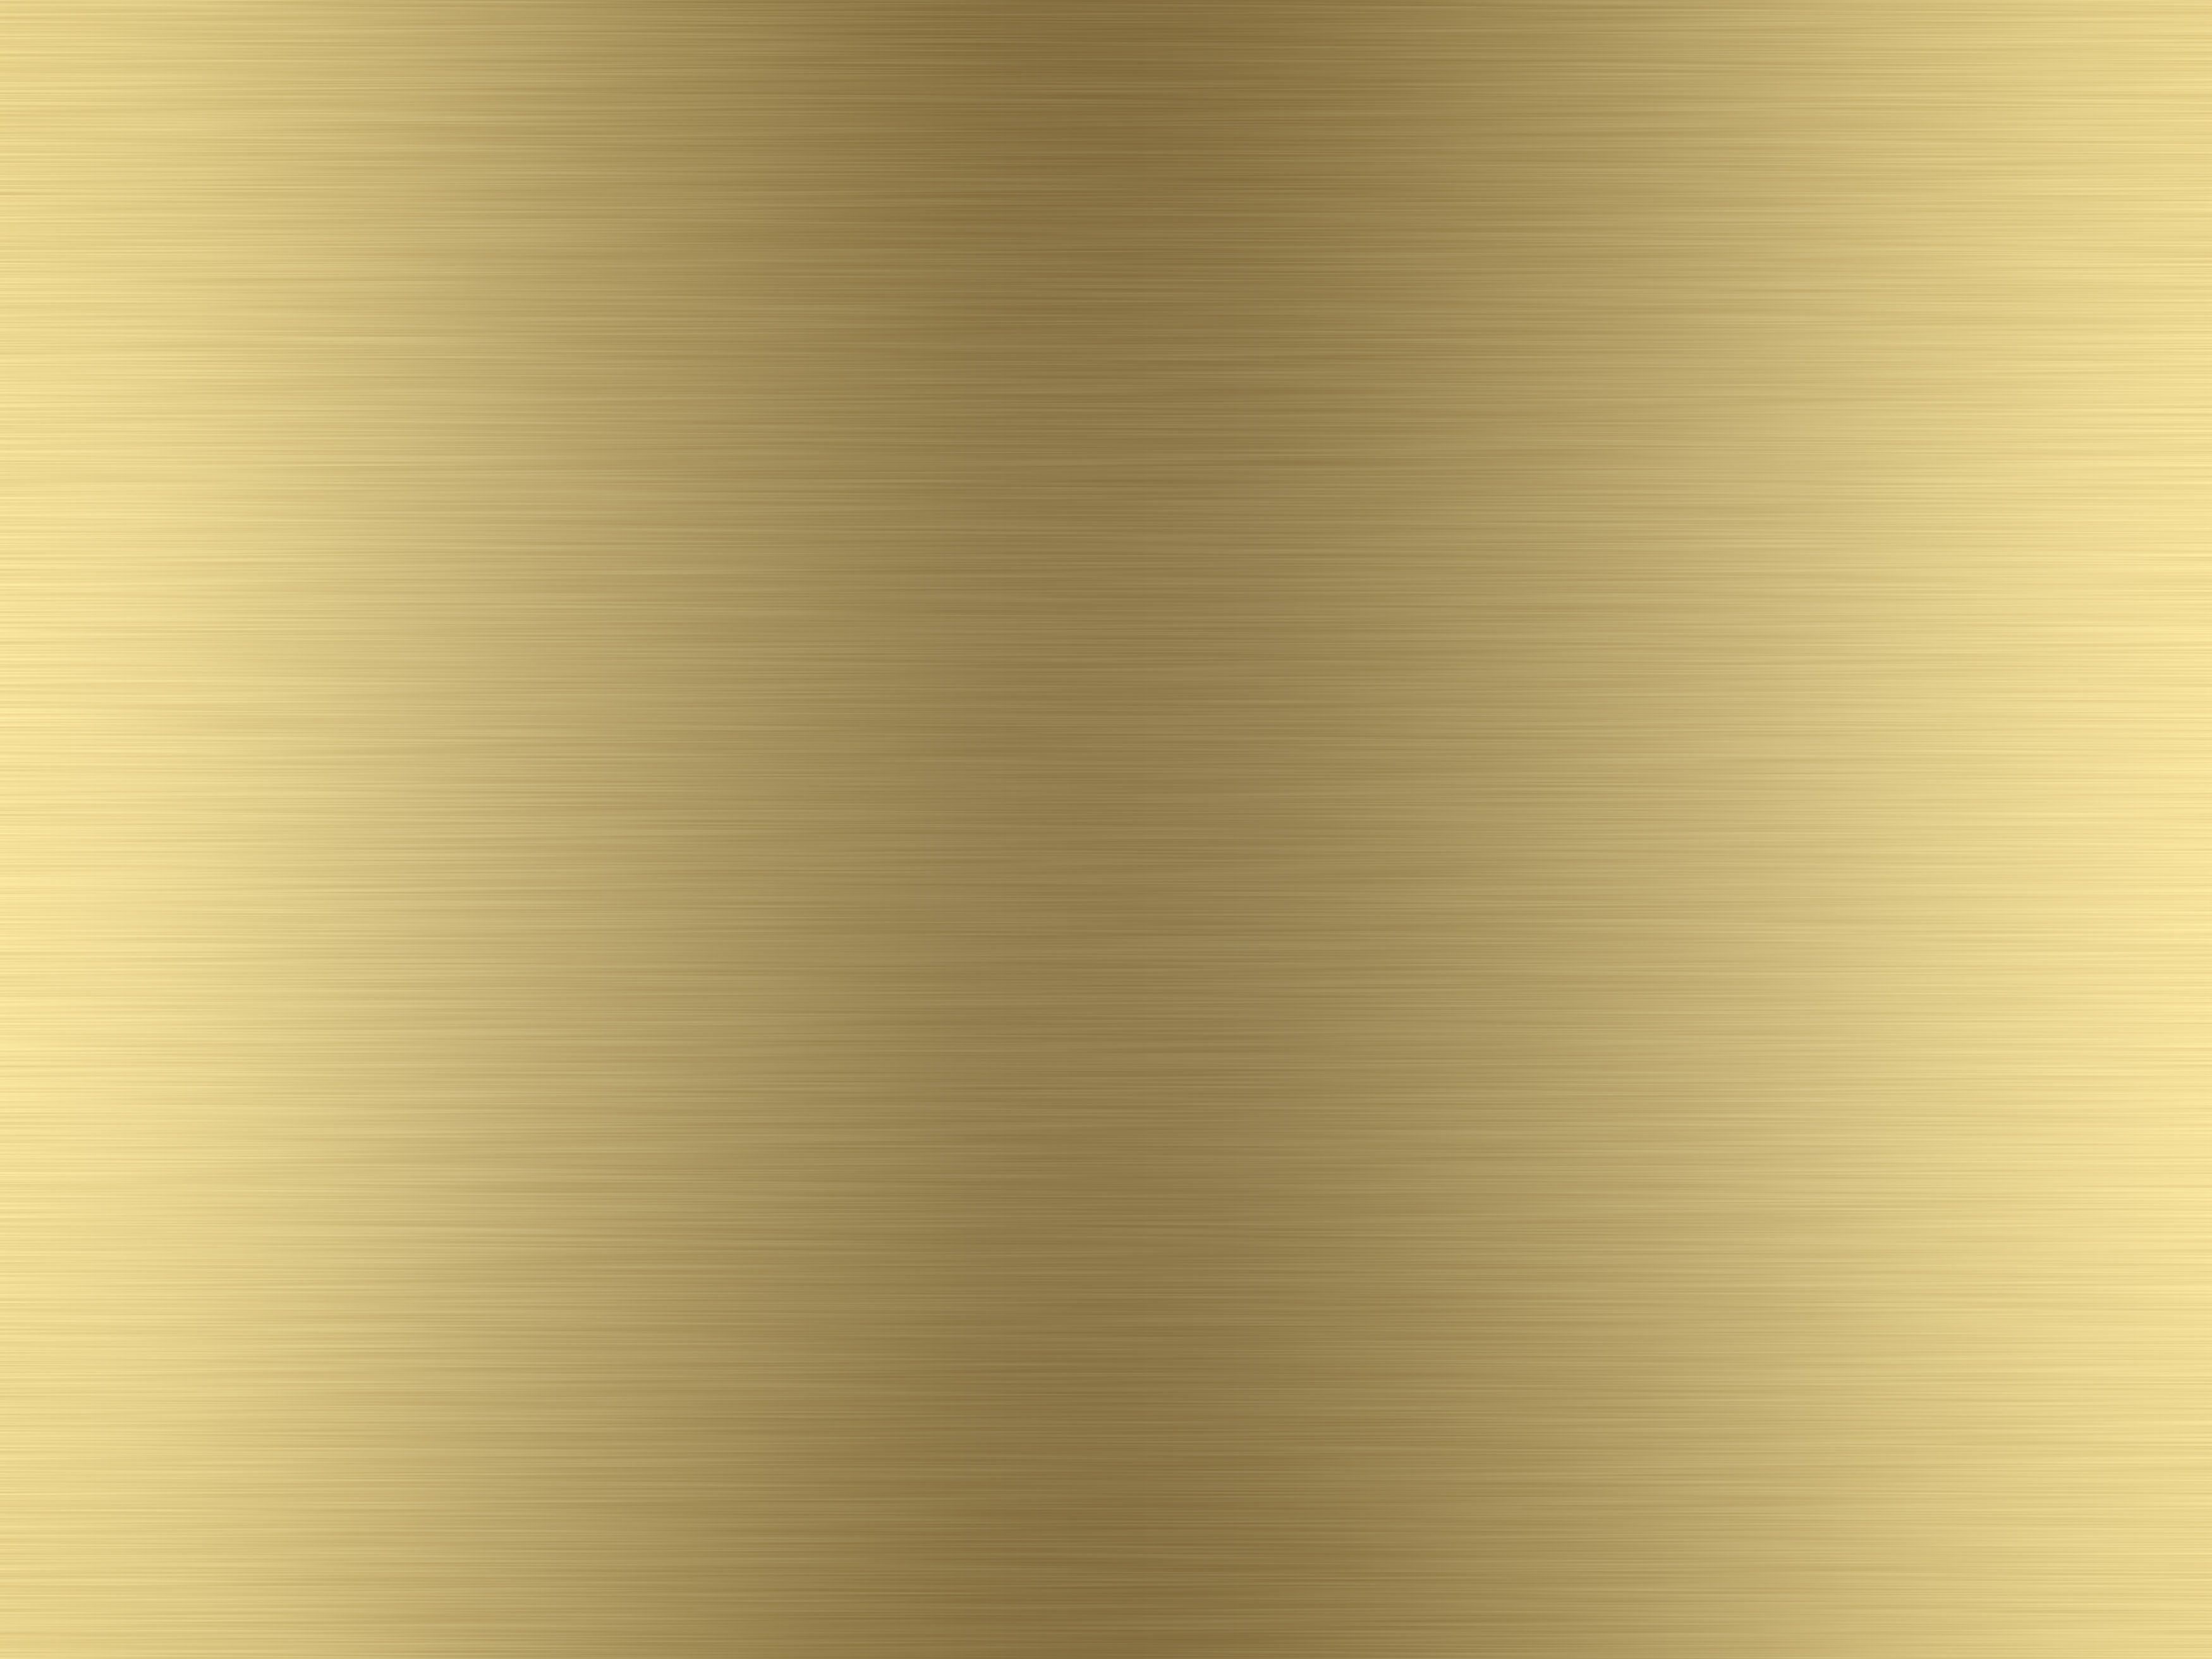 rendered lightly brushed gold background texture | www ...